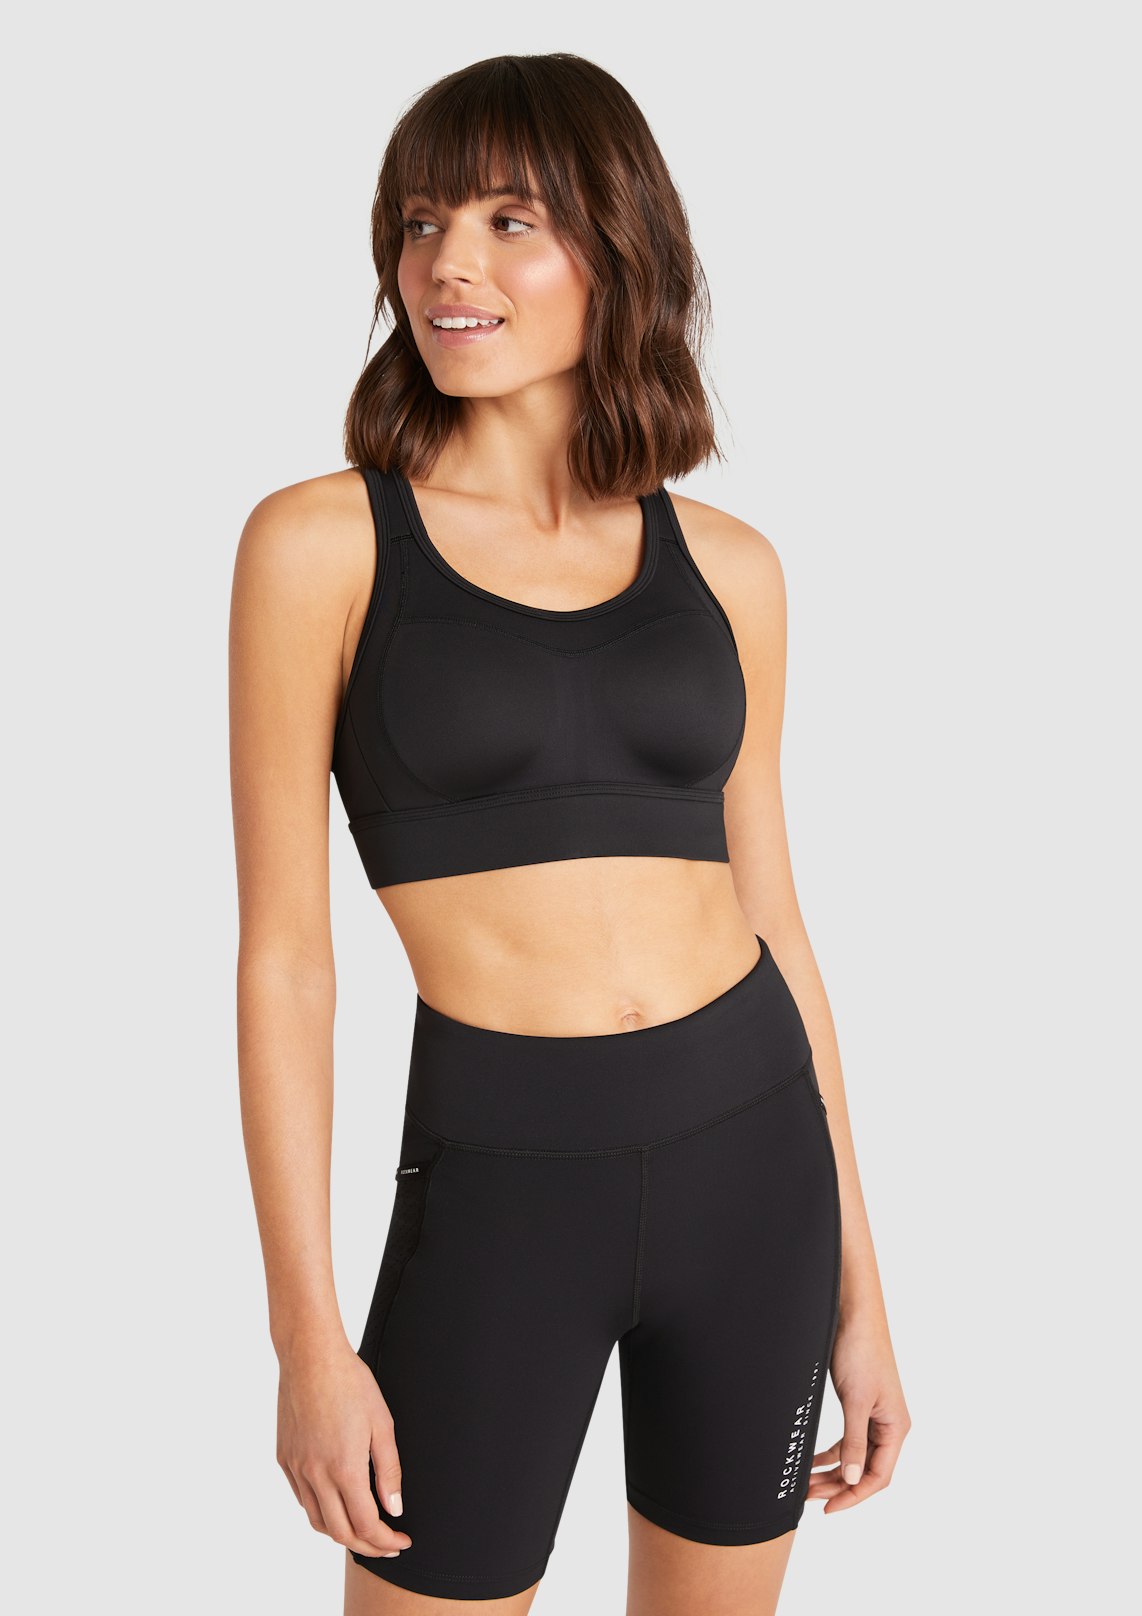 Black Olympia Moulded High Impact Sports Bra, Women's Tops